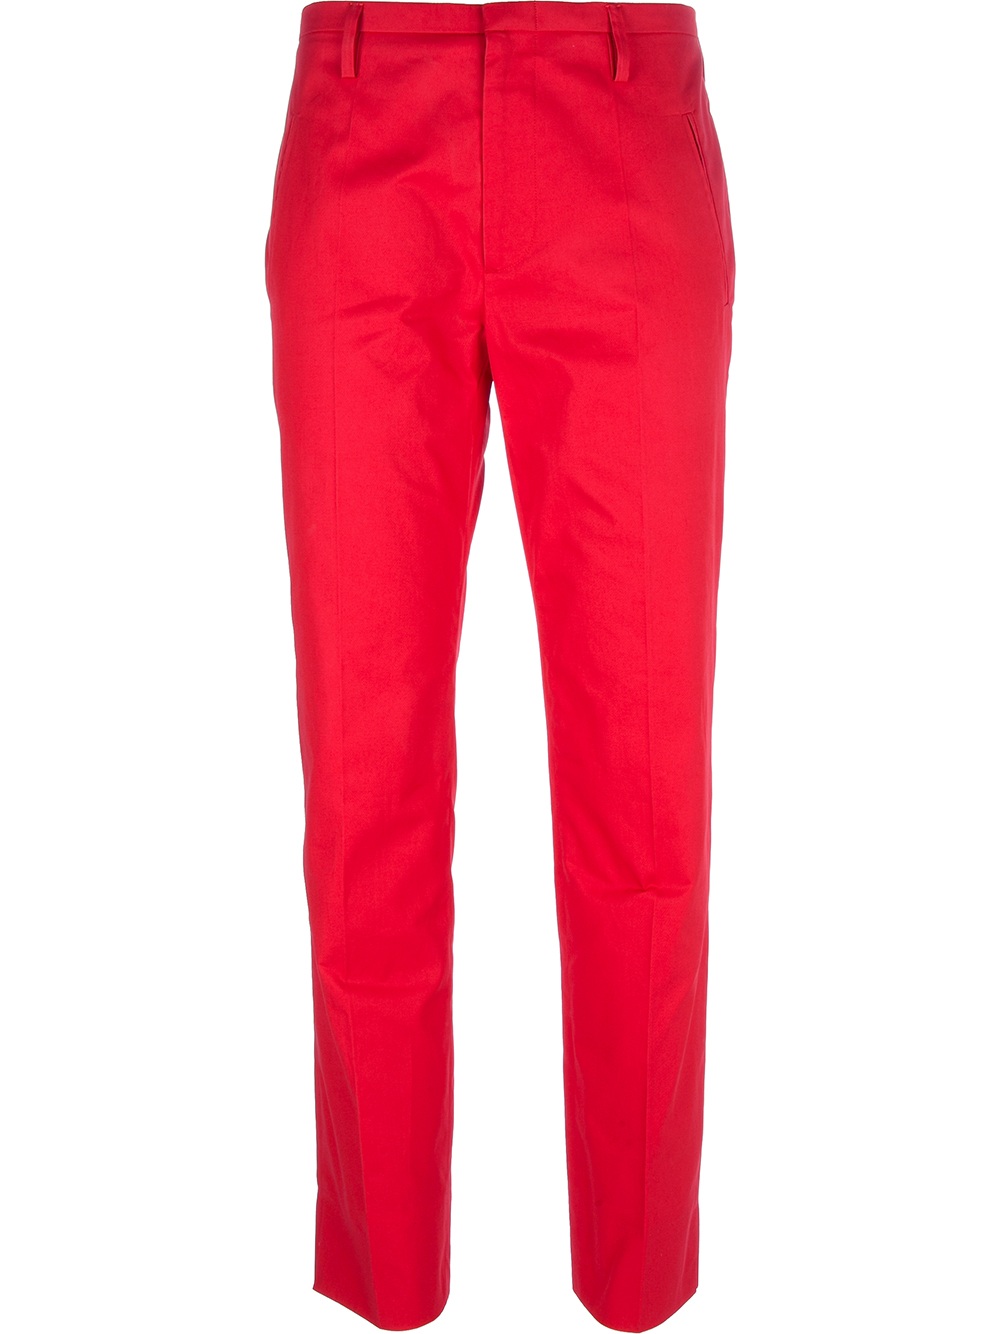 Lyst - Sofie D'Hoore Classic Fit Trouser in Red